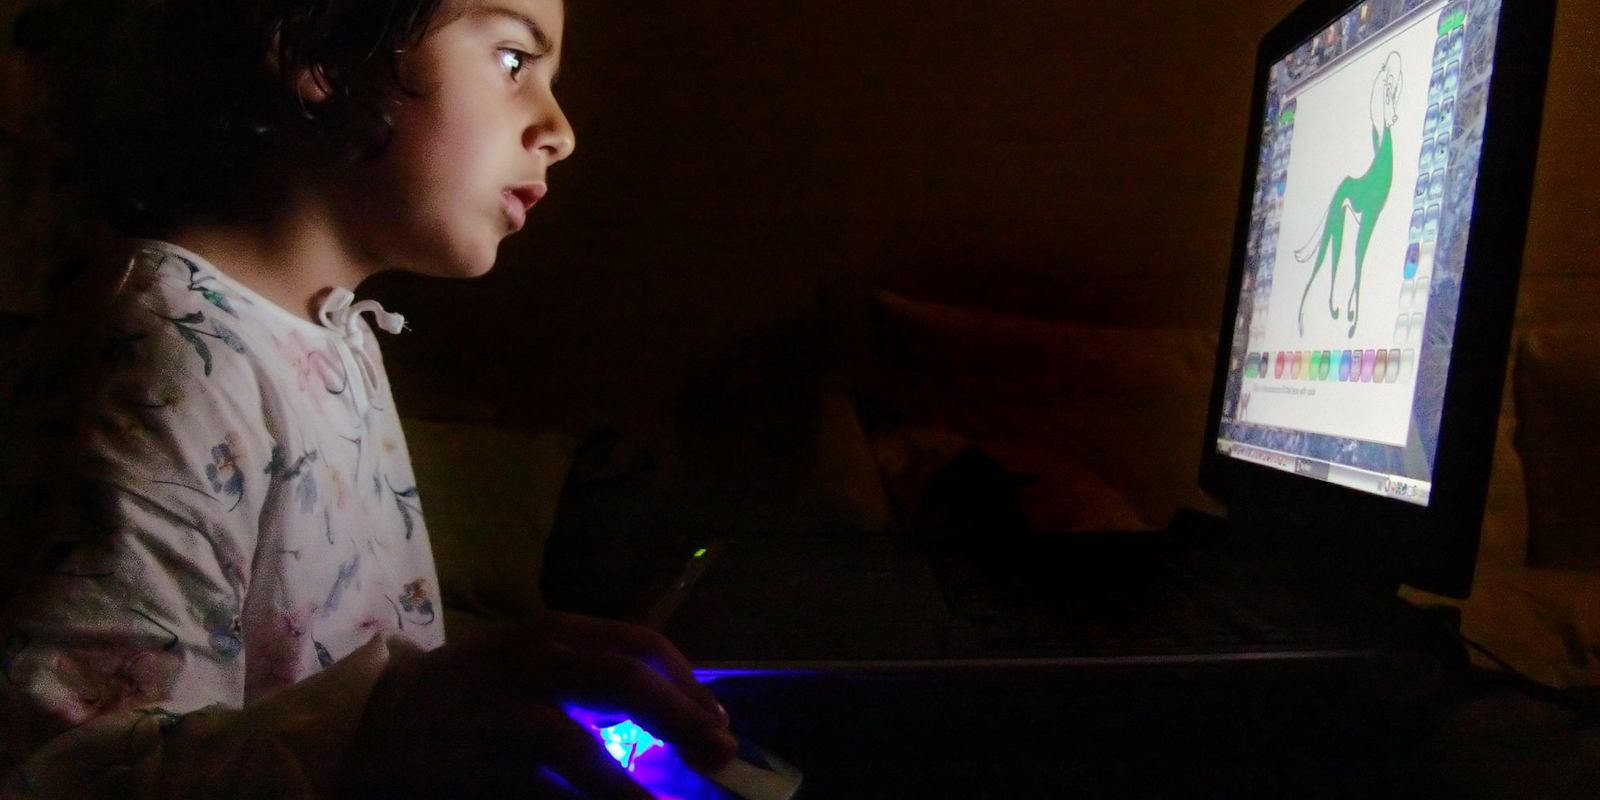 A teen using a computer in the dark